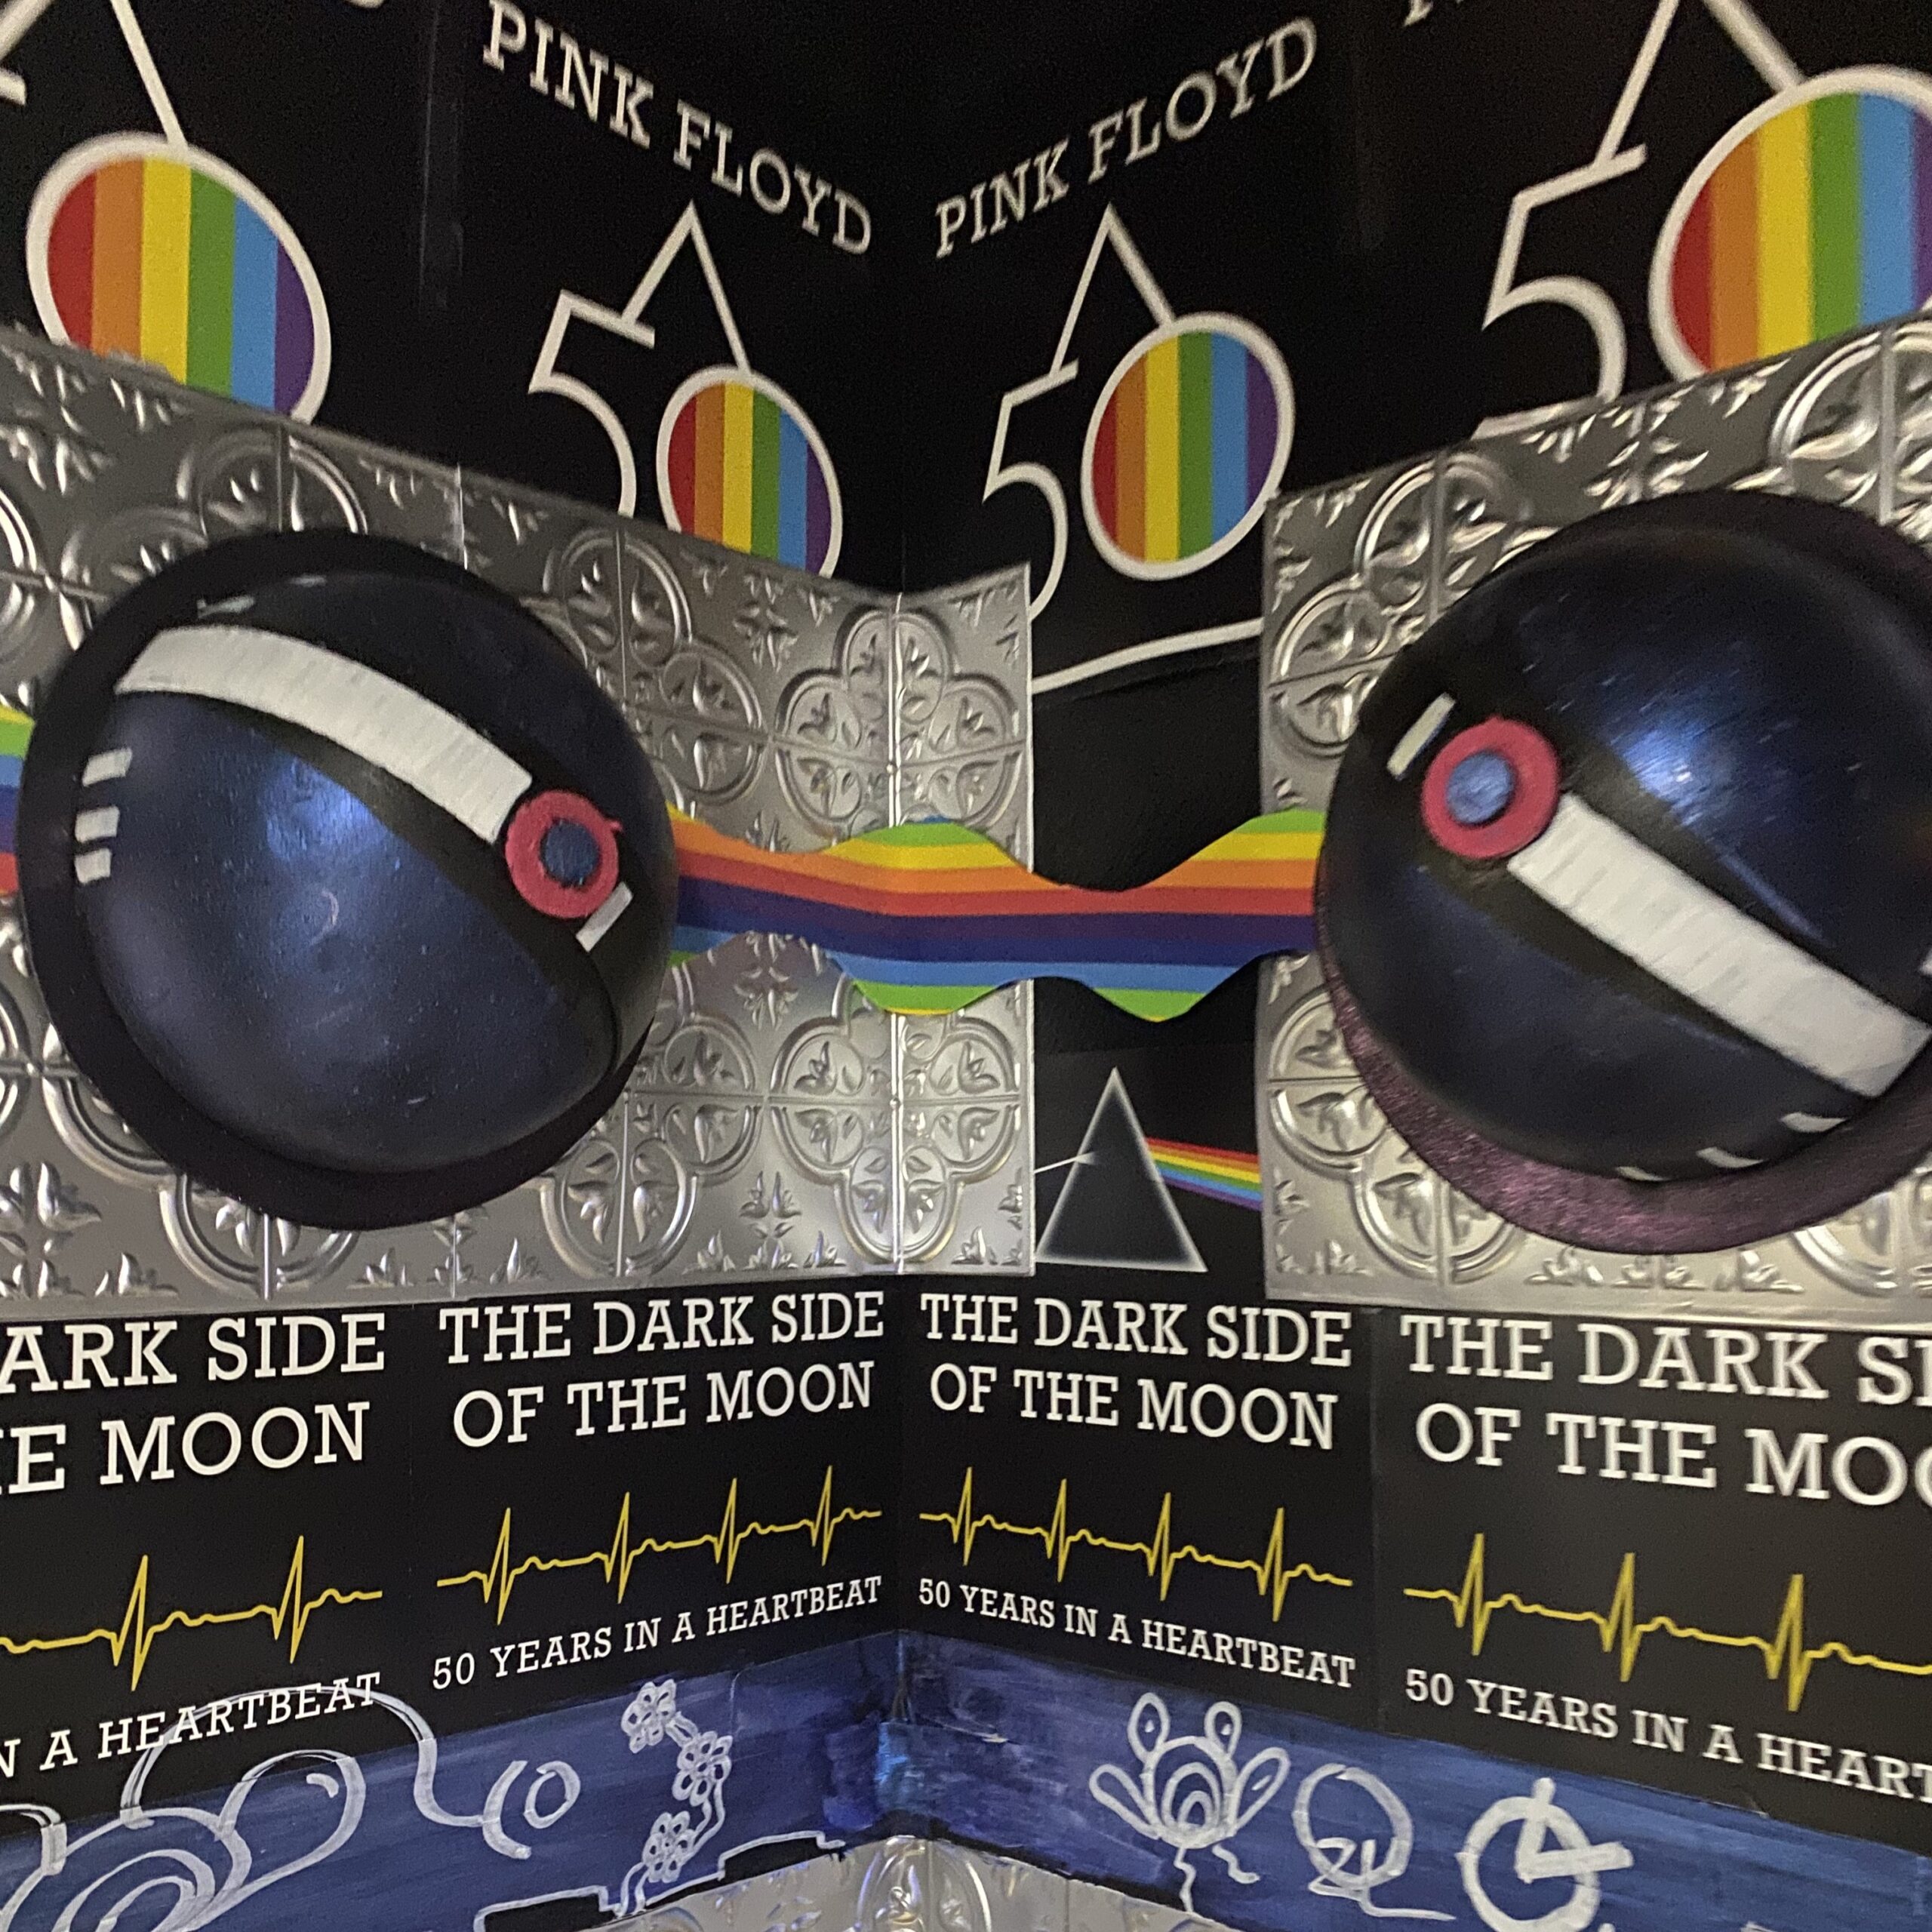 Artwork inspired by the CSN Planetarium show honoring 'Dark Side of the Moon.' Photo by: Oscar Benitez.